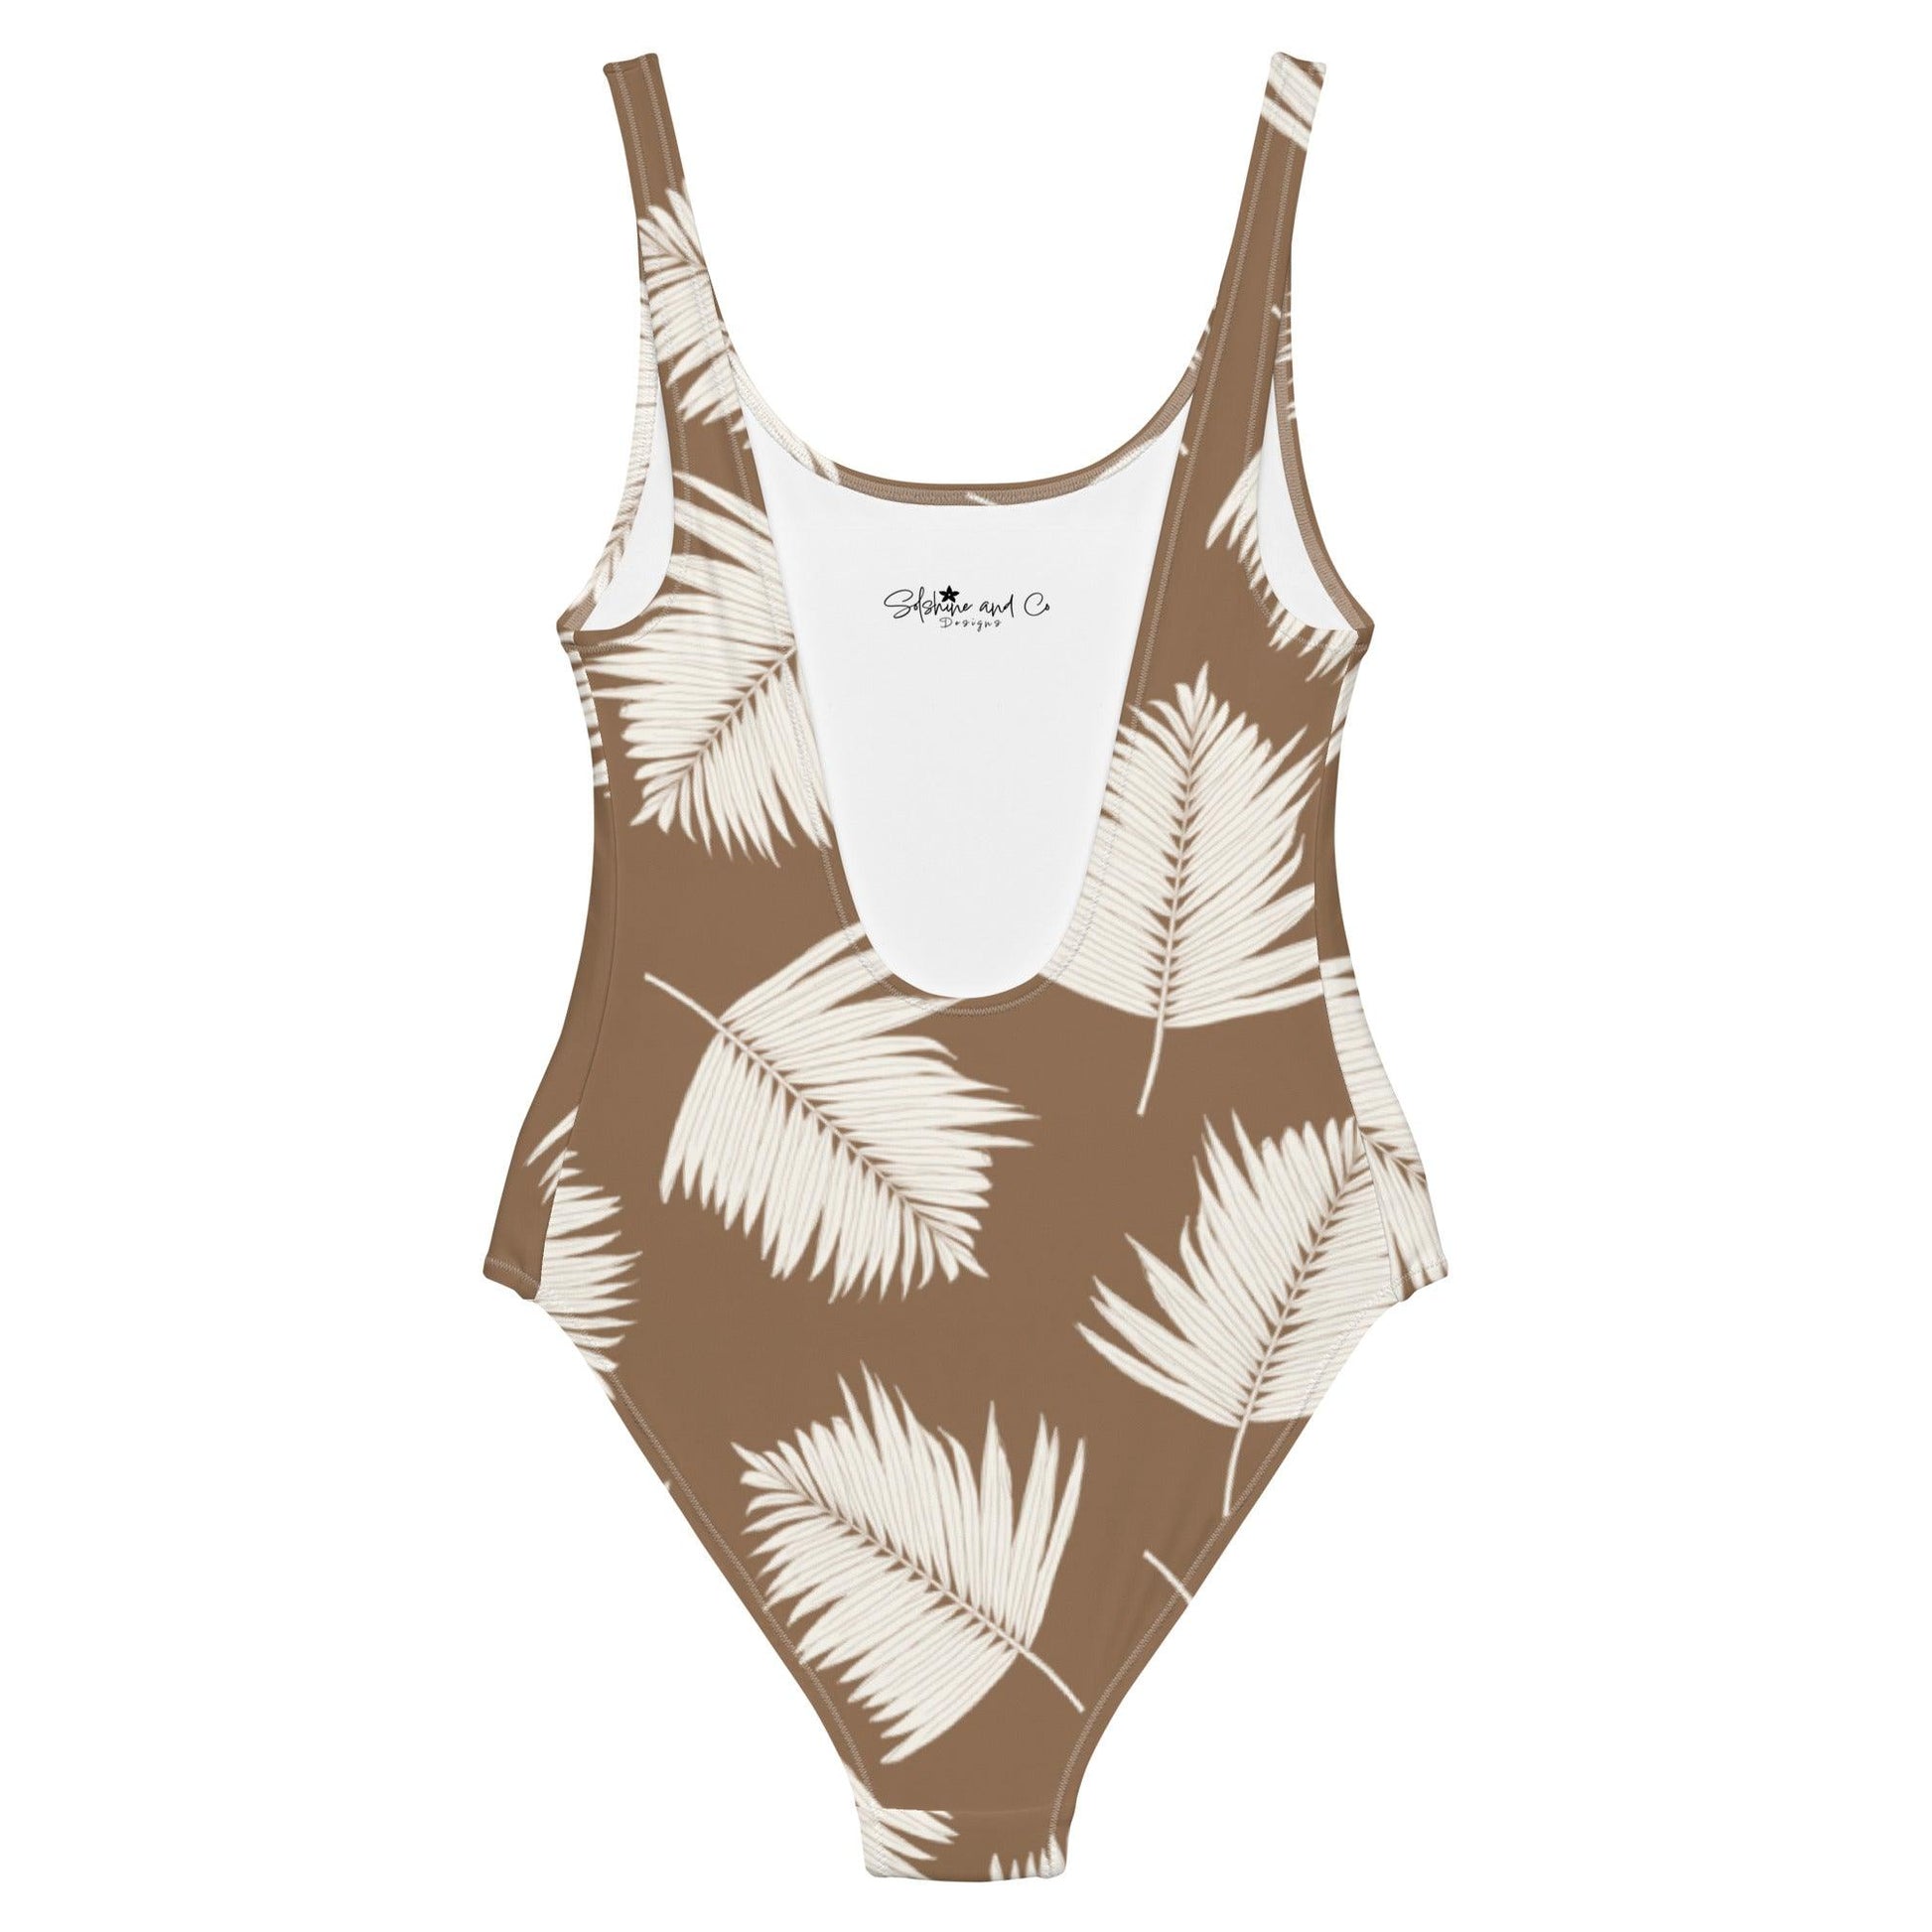 Sandy Palms One-Piece Swimsuit - Solshine and Co